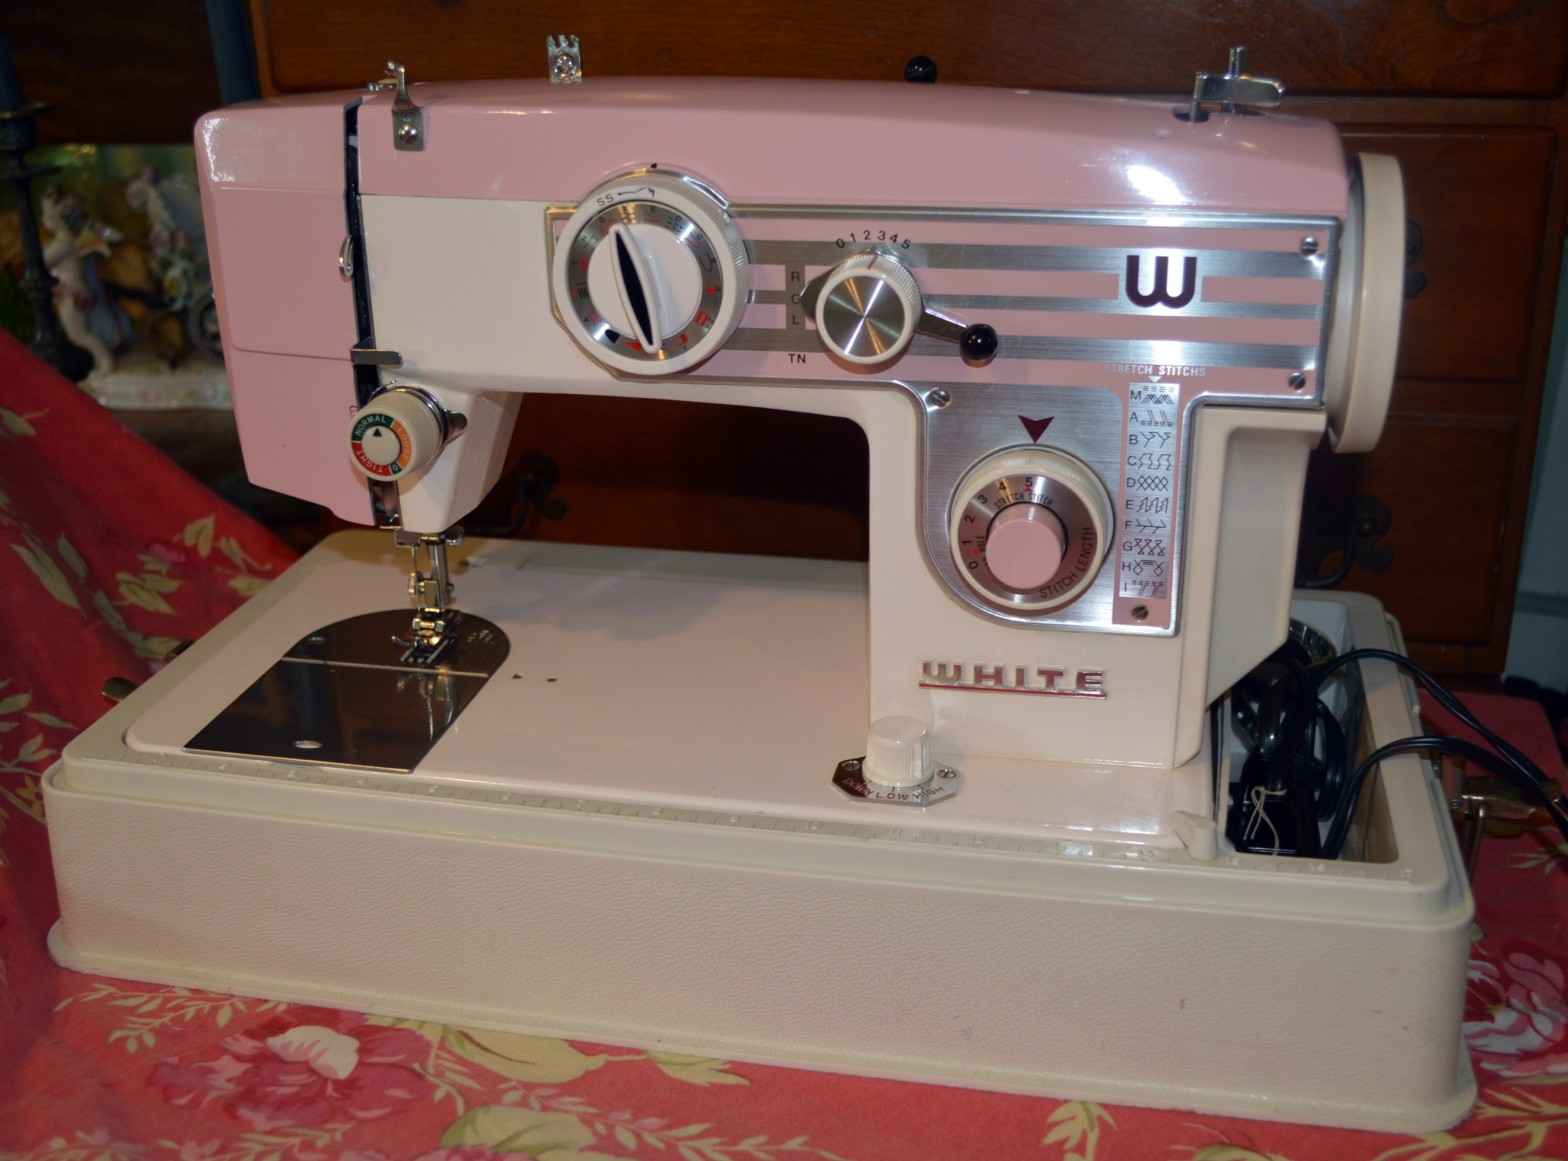 Restoration of a “Pink and White” White Model 656 – Professionally